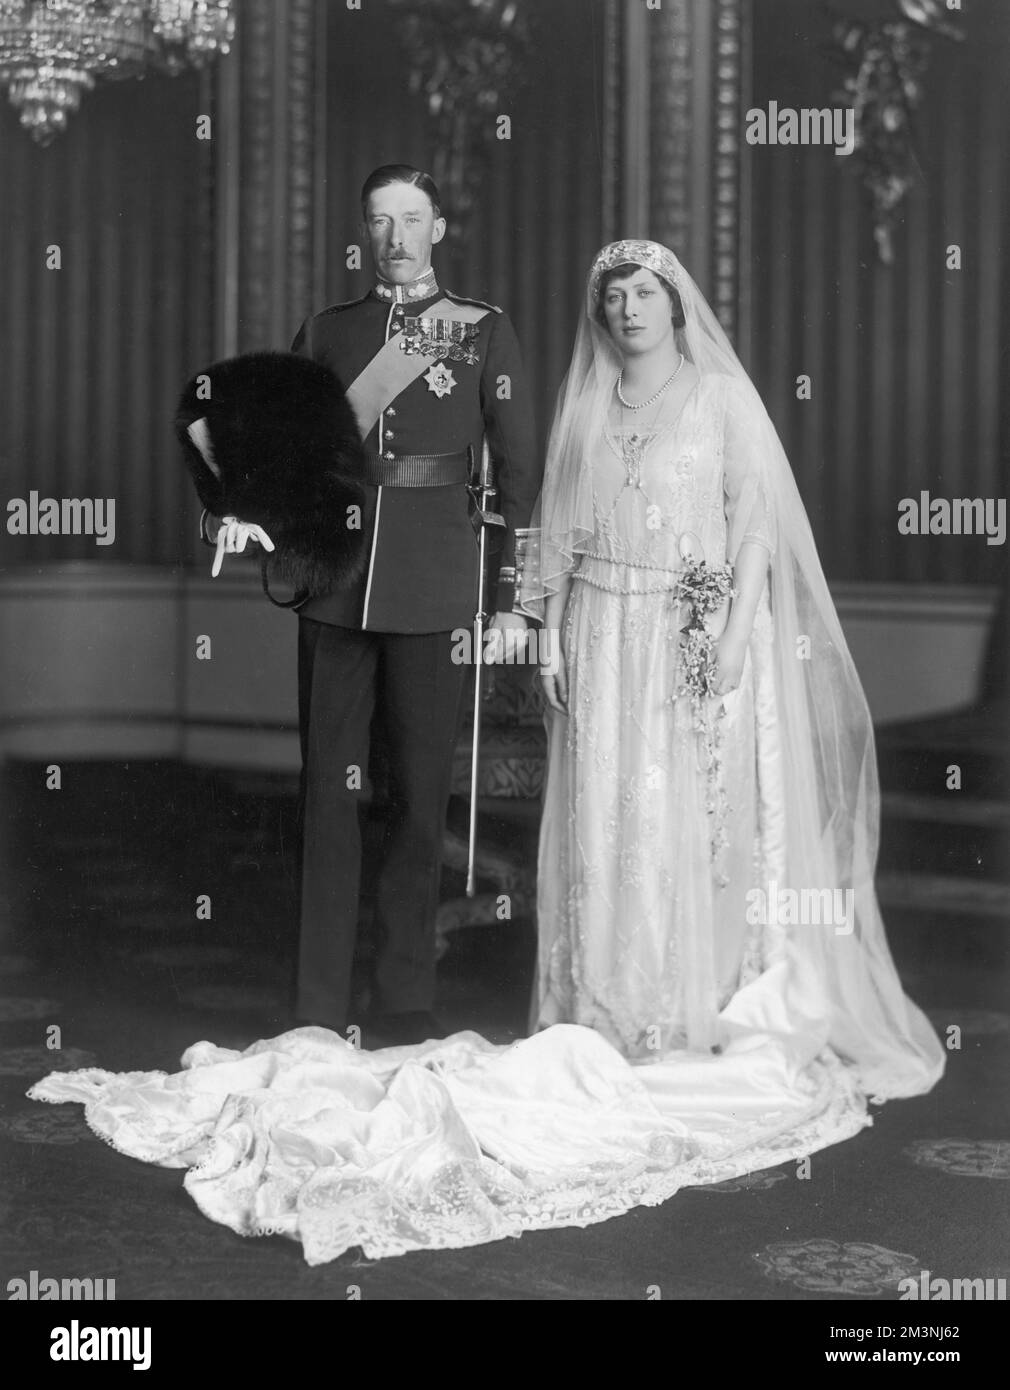 Princess Victoria Alexandra Alice Mary, the Princess Royal (1897 - 1965), Countess of Harewood, on her wedding day with her husband, Henry Charles George, Viscount Lascelles, later the Earl of Harewood (1882 - 1947).       Date: 28 February 1922 Stock Photo